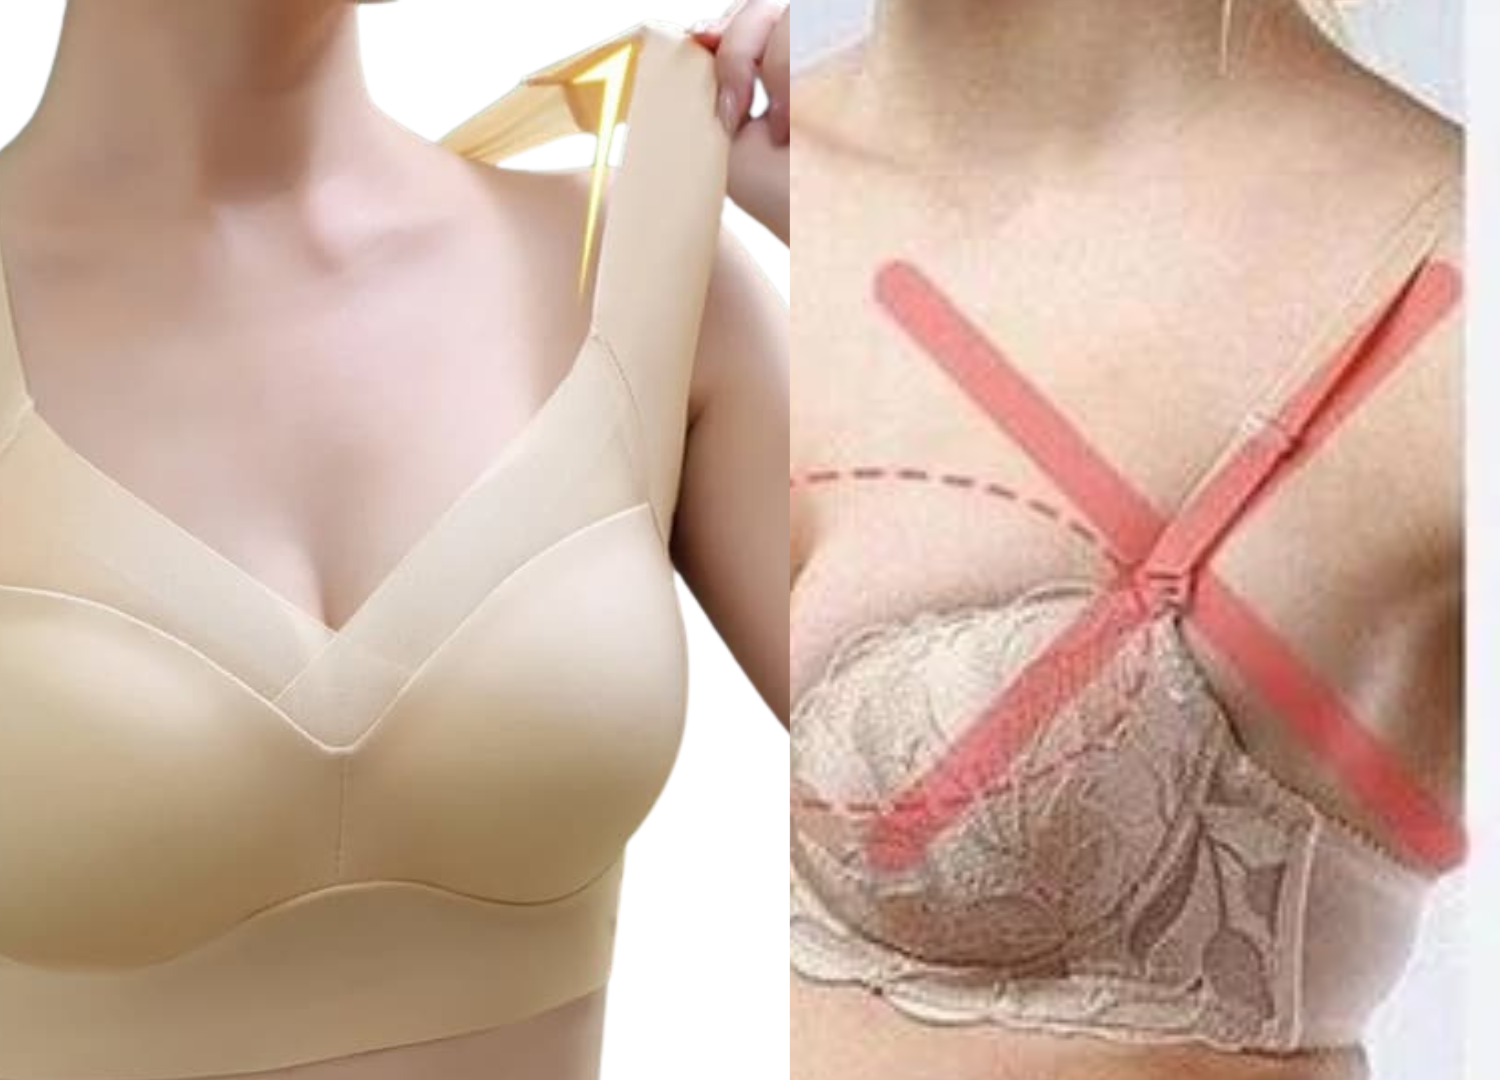 Fashion Deep Cup Orthopedic Bra, Sexy Push Up Wireless Bras, Stretch-Lace,  Super-Lift, and Posture Correction Bra (Beige,2XL)